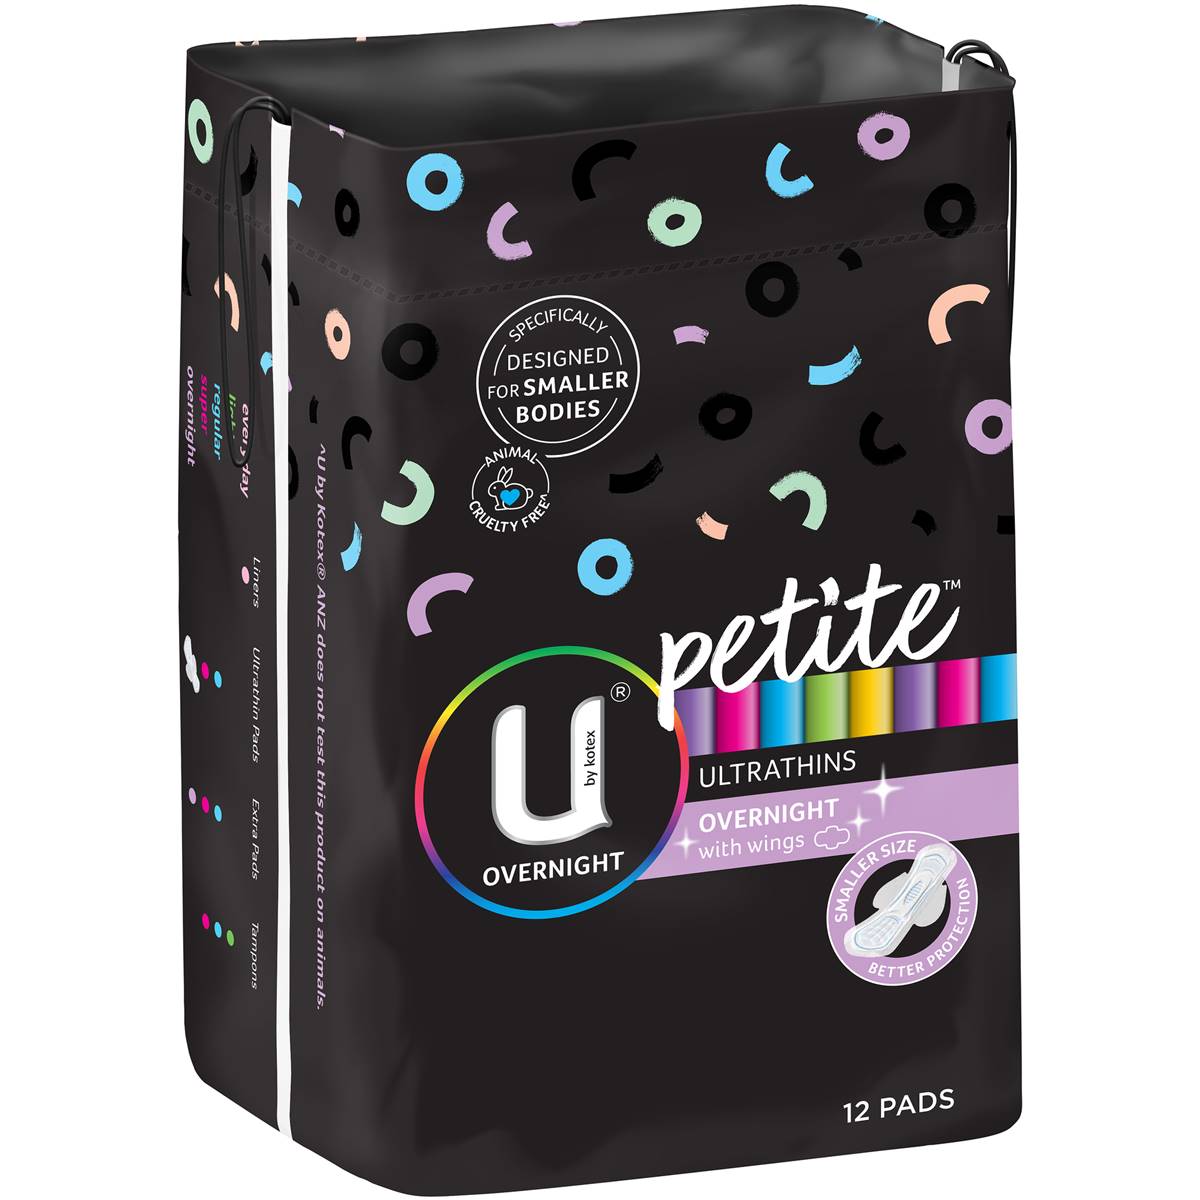 U By Kotex Petite Ultrathin Pads Overnight With Wings 12 Pack